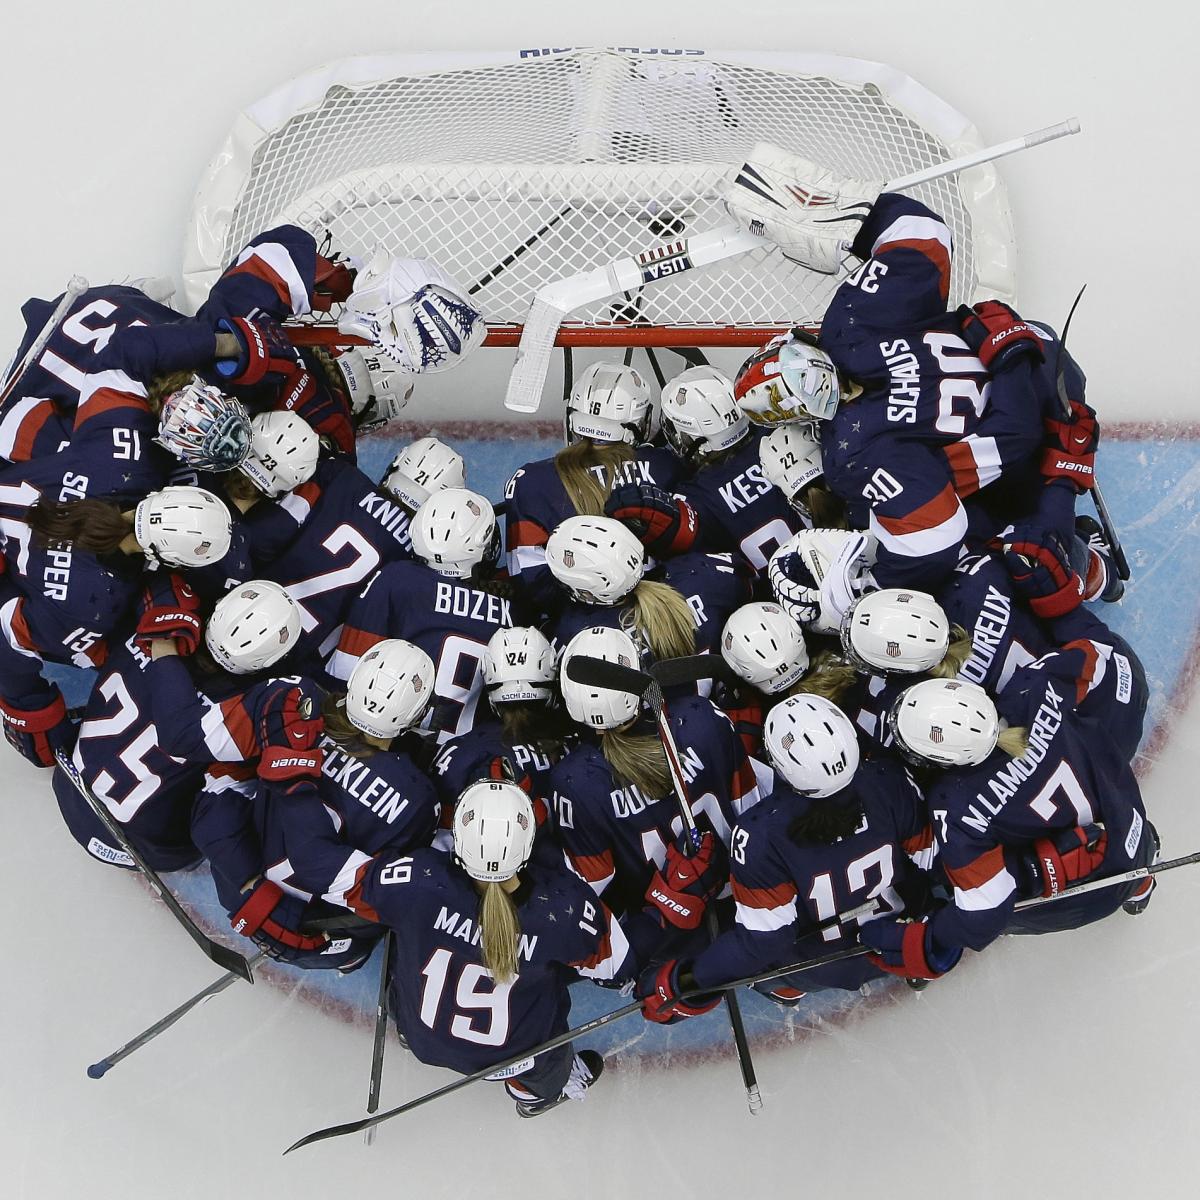 US Olympic Hockey Team 2014 Predictions for Remaining Men's and Women